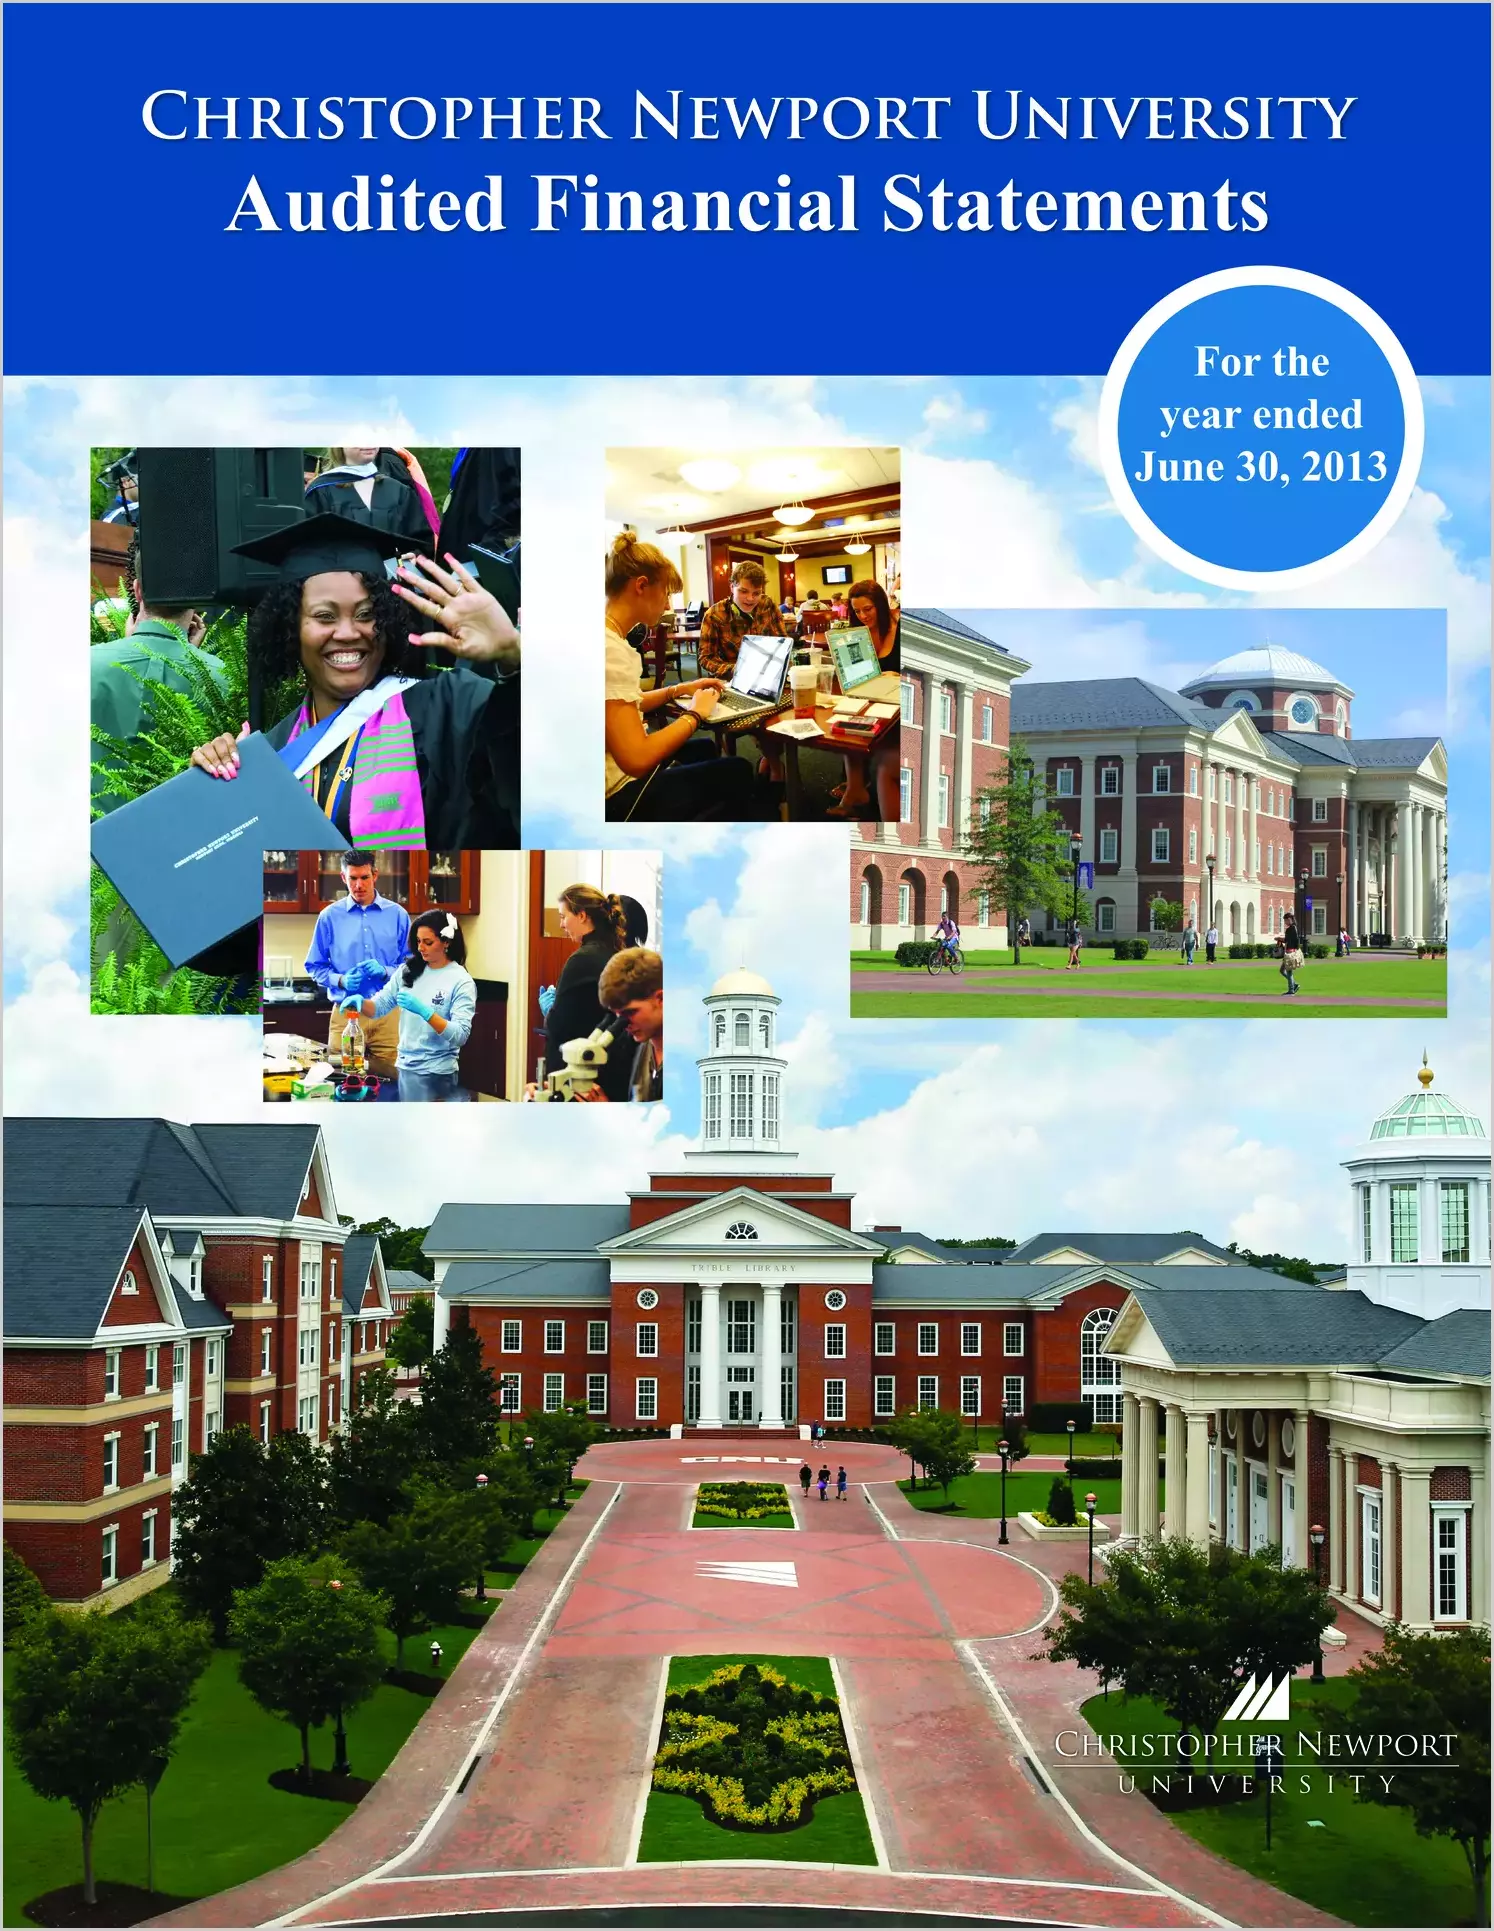 Christopher Newport University Financial Statements for the year ended June 30, 2013